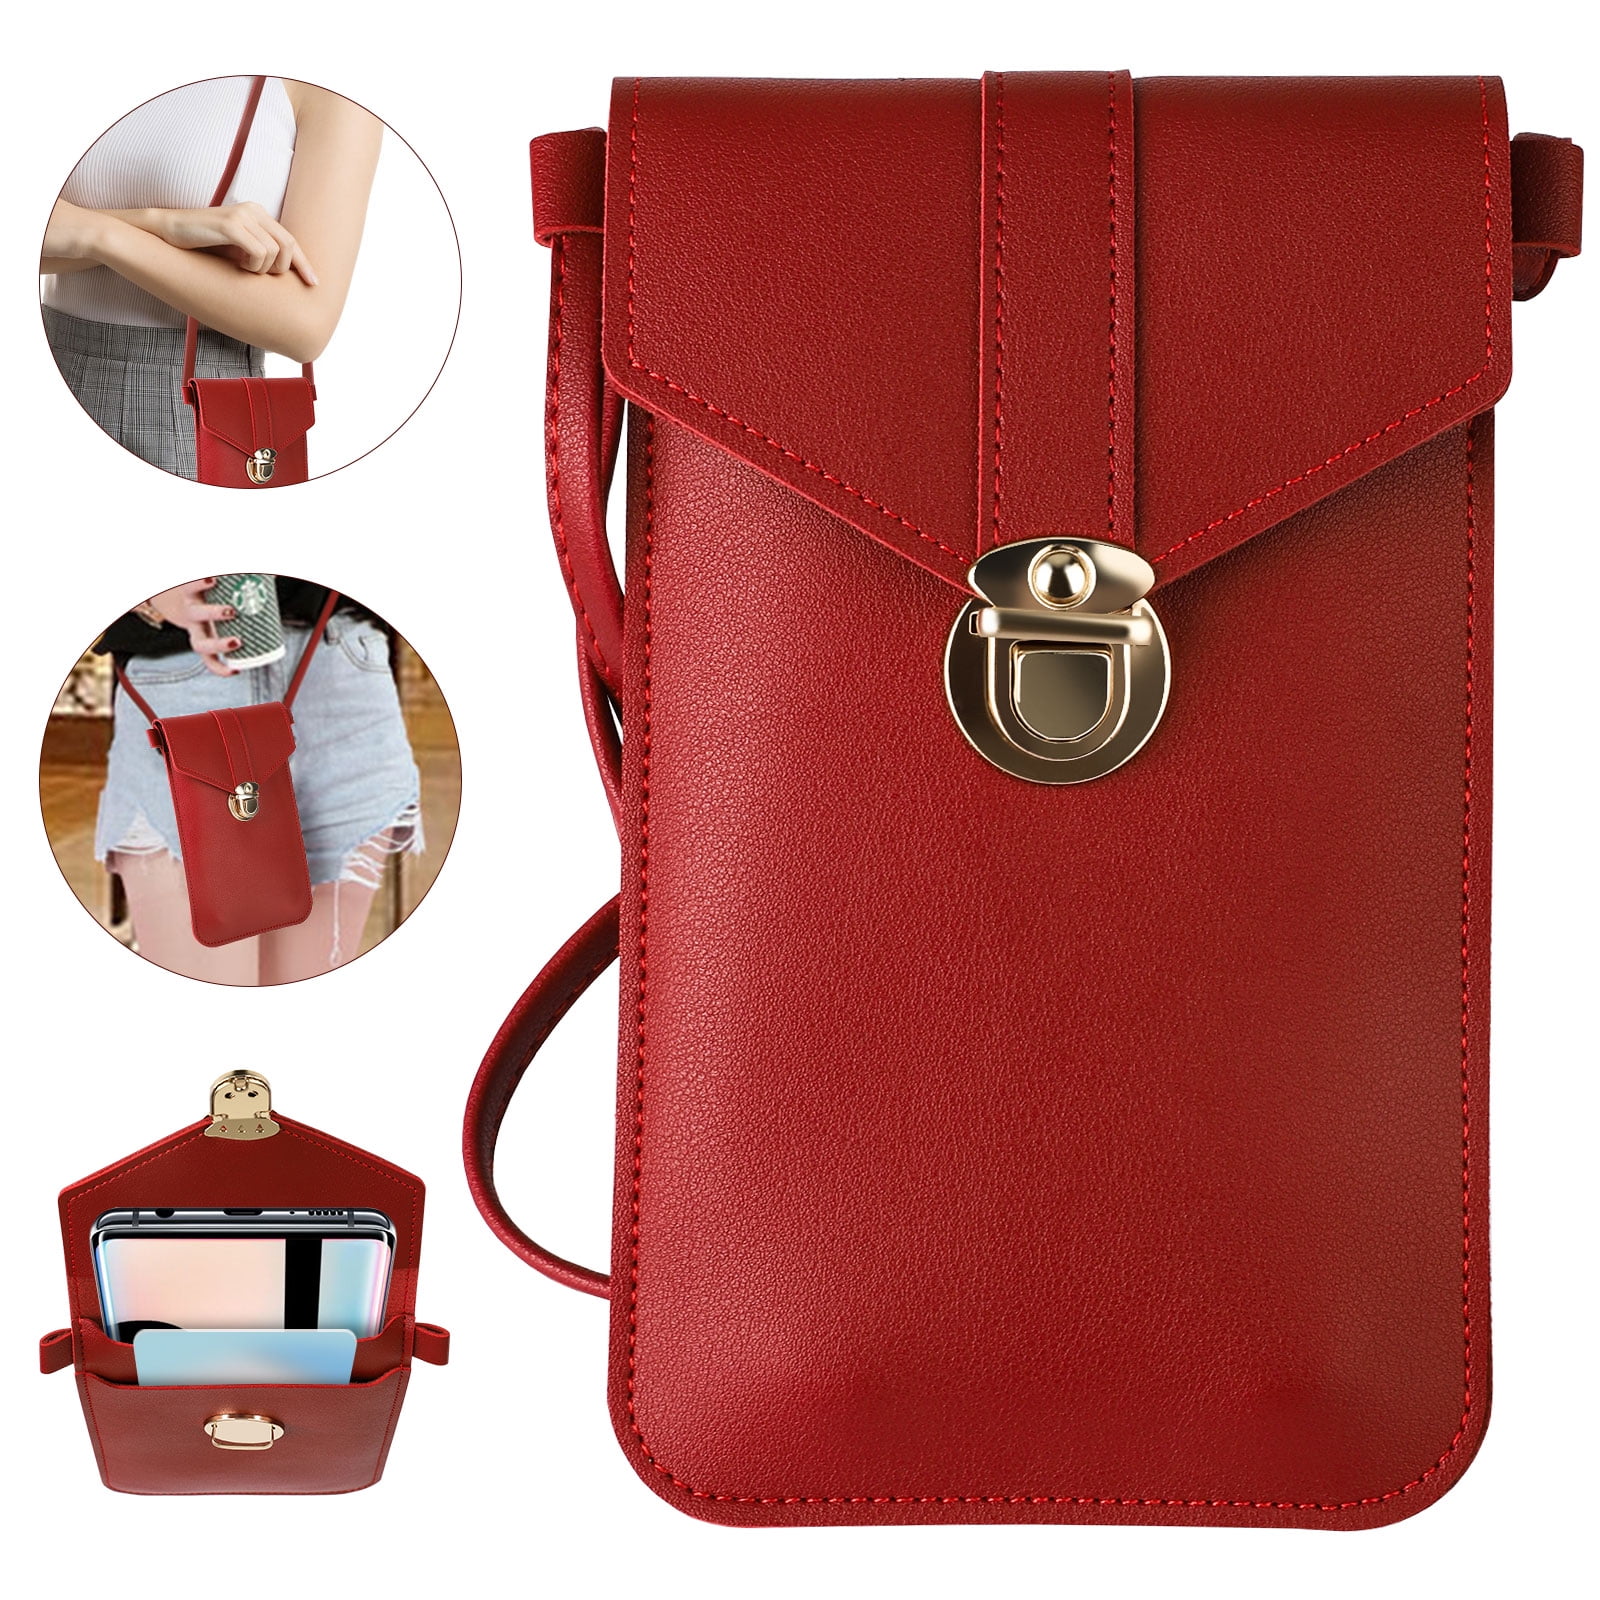 Touch Screen Cell Phone Purse Crossbody Leather Wallet Pouch Shoulder Bag Women 